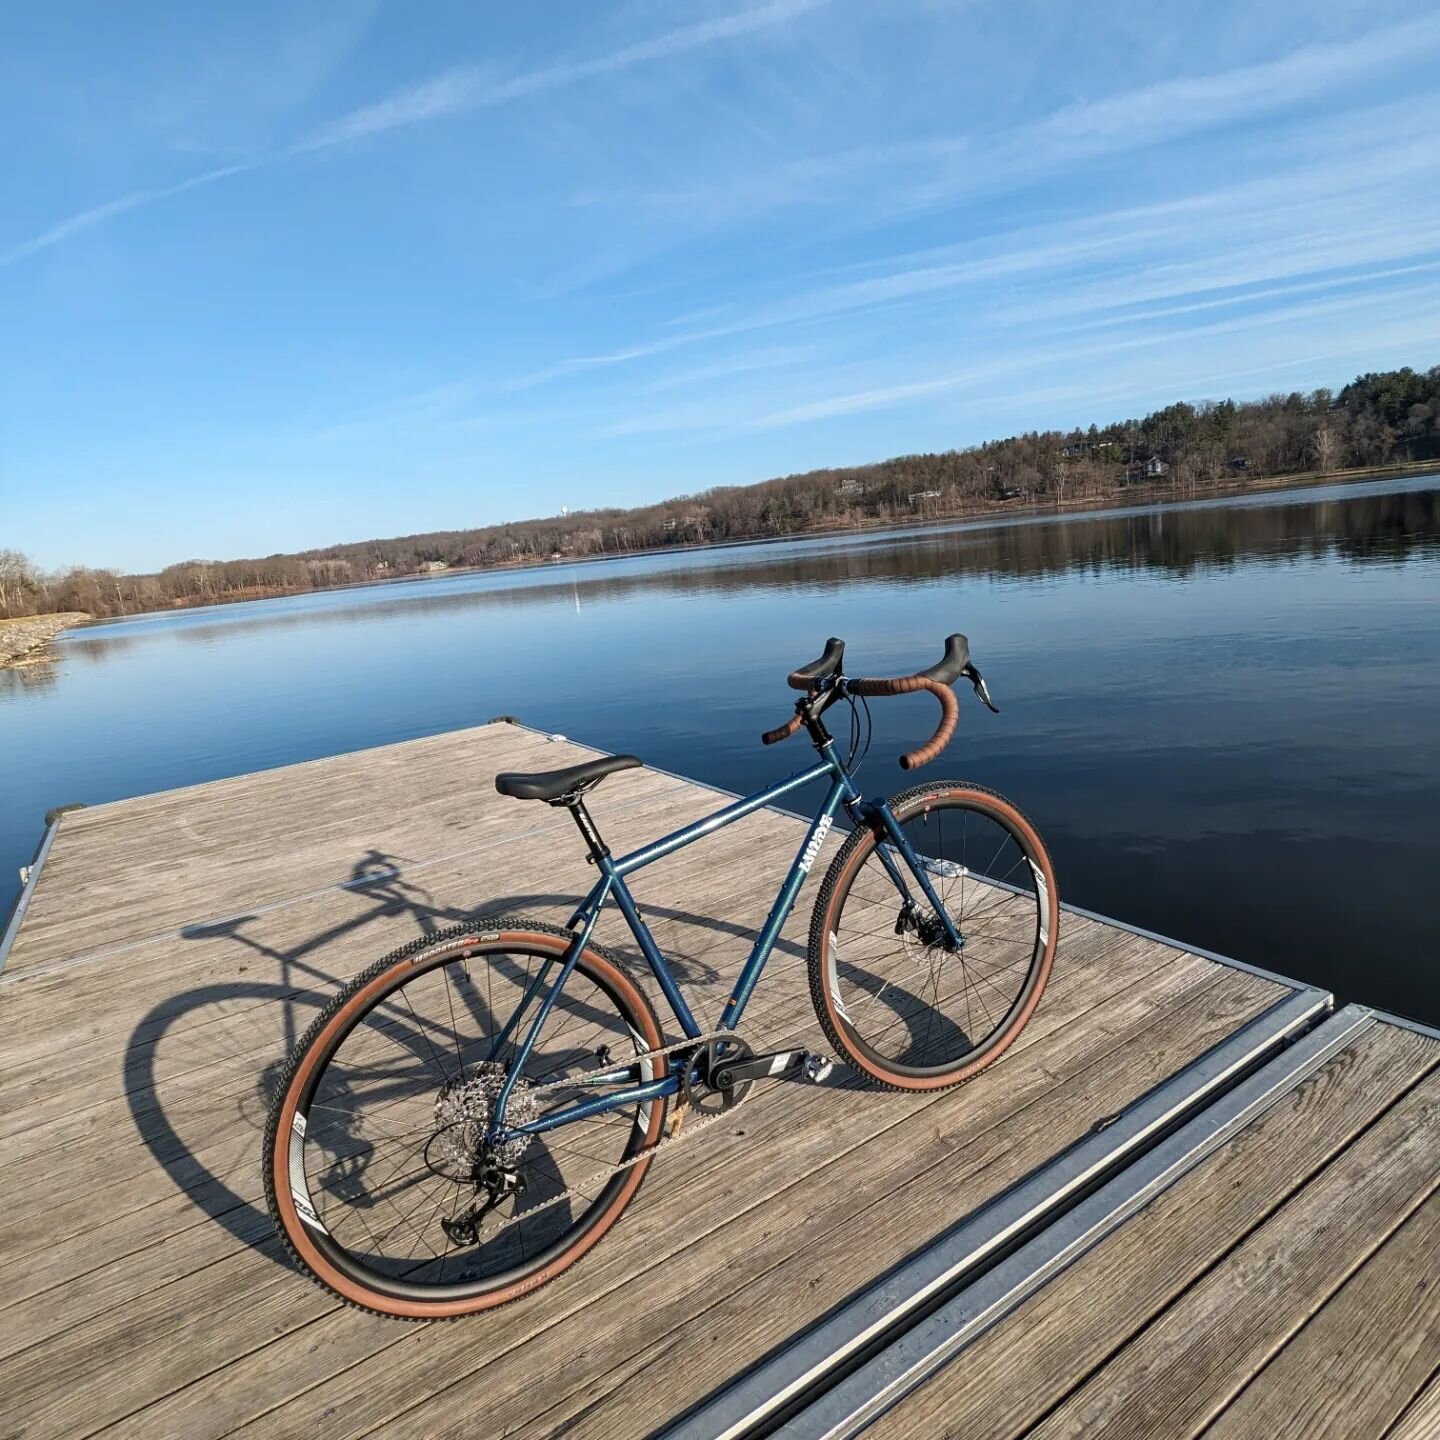 New @wilde.bikes Rambler out in the wild this morning, cruising along the Huron River and taking a tour of the docks. Pretty impressed with how this bike rides. Wilde really found the perfect balance between agility and stability. This bike simply cr